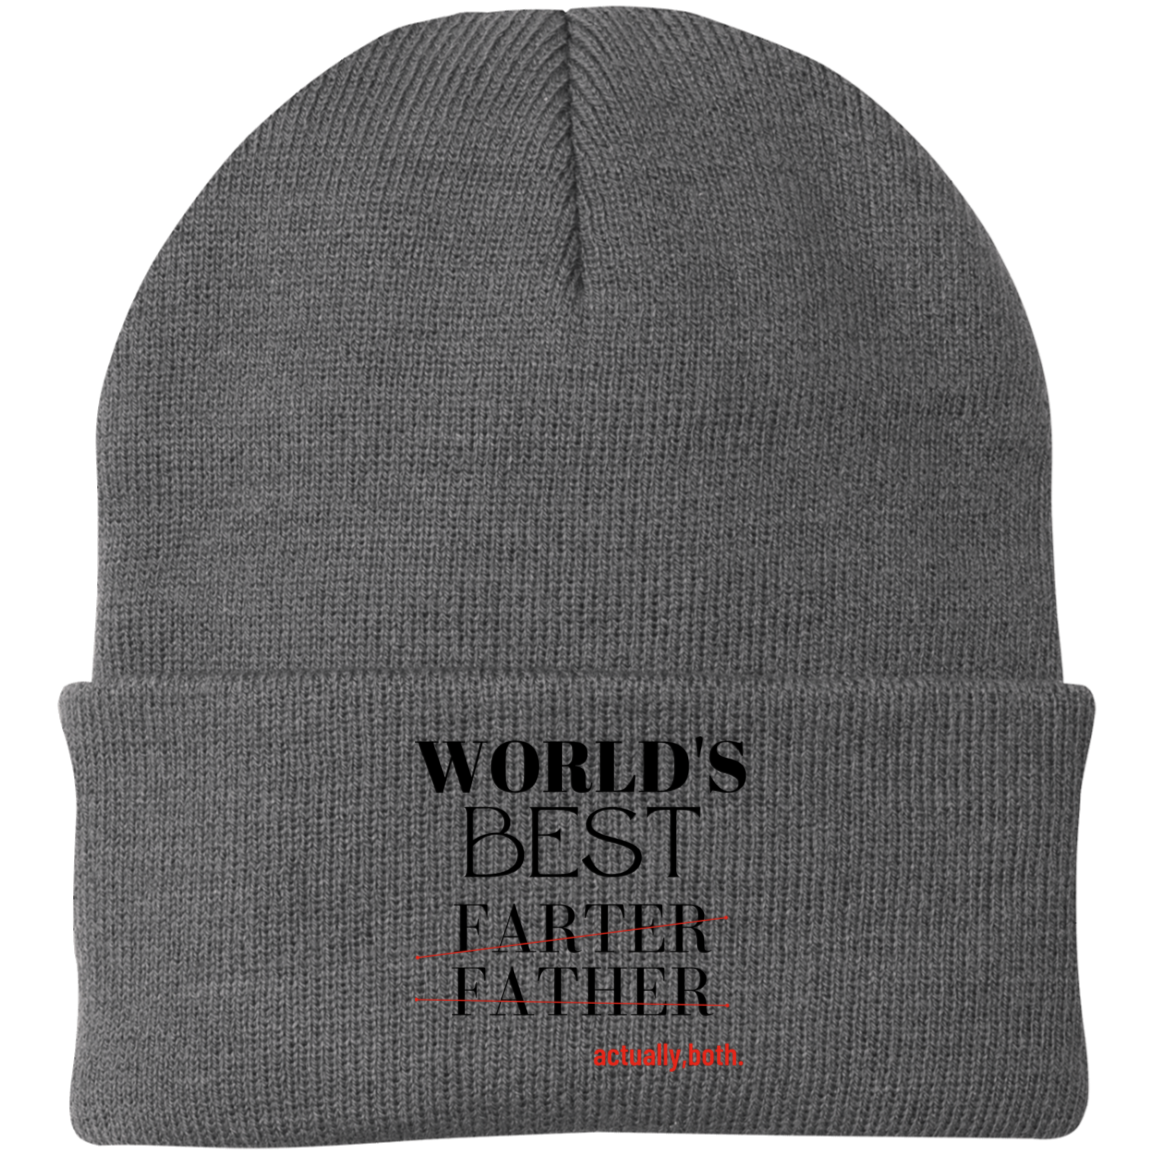 WORLD'S BEST FATHER Embroidered Knit Cap